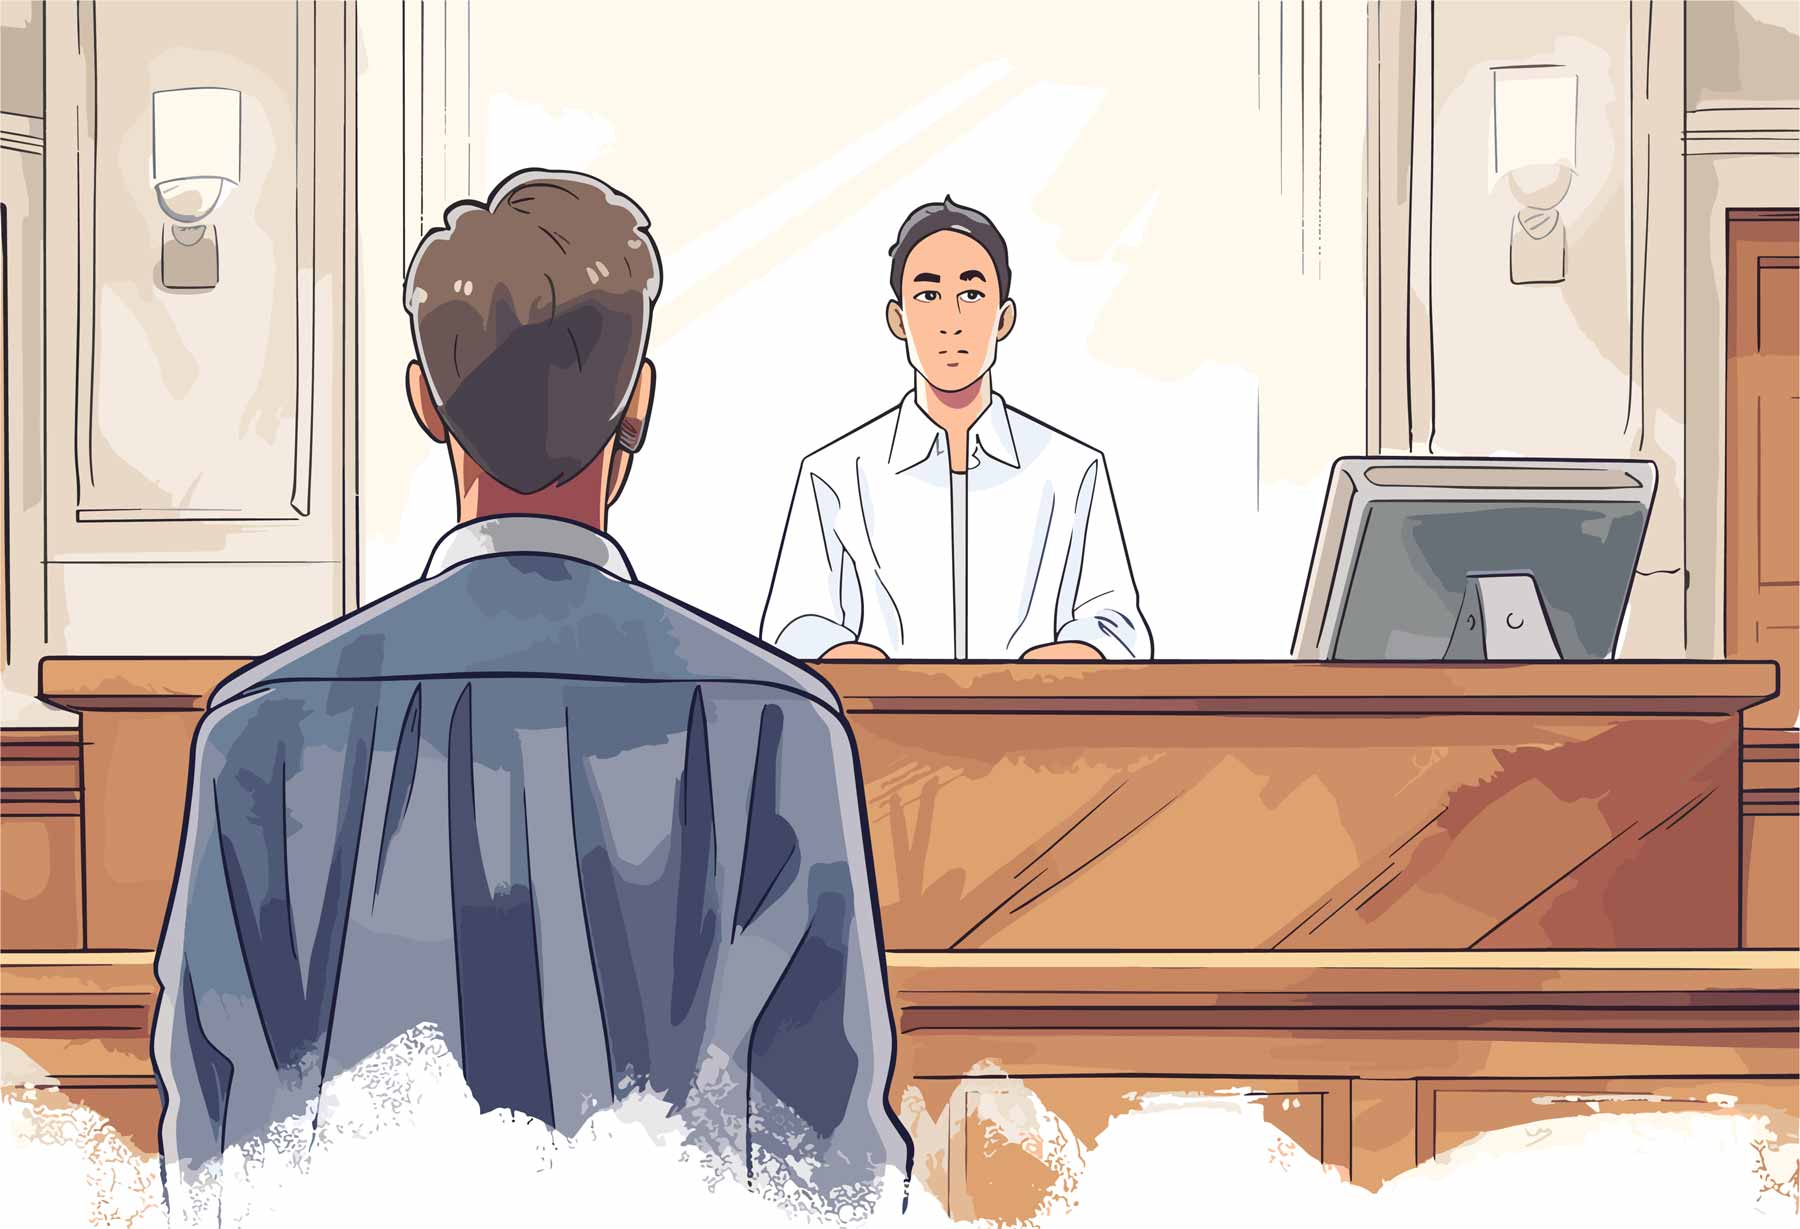 cartoon image of a man facing a judge in court by himself